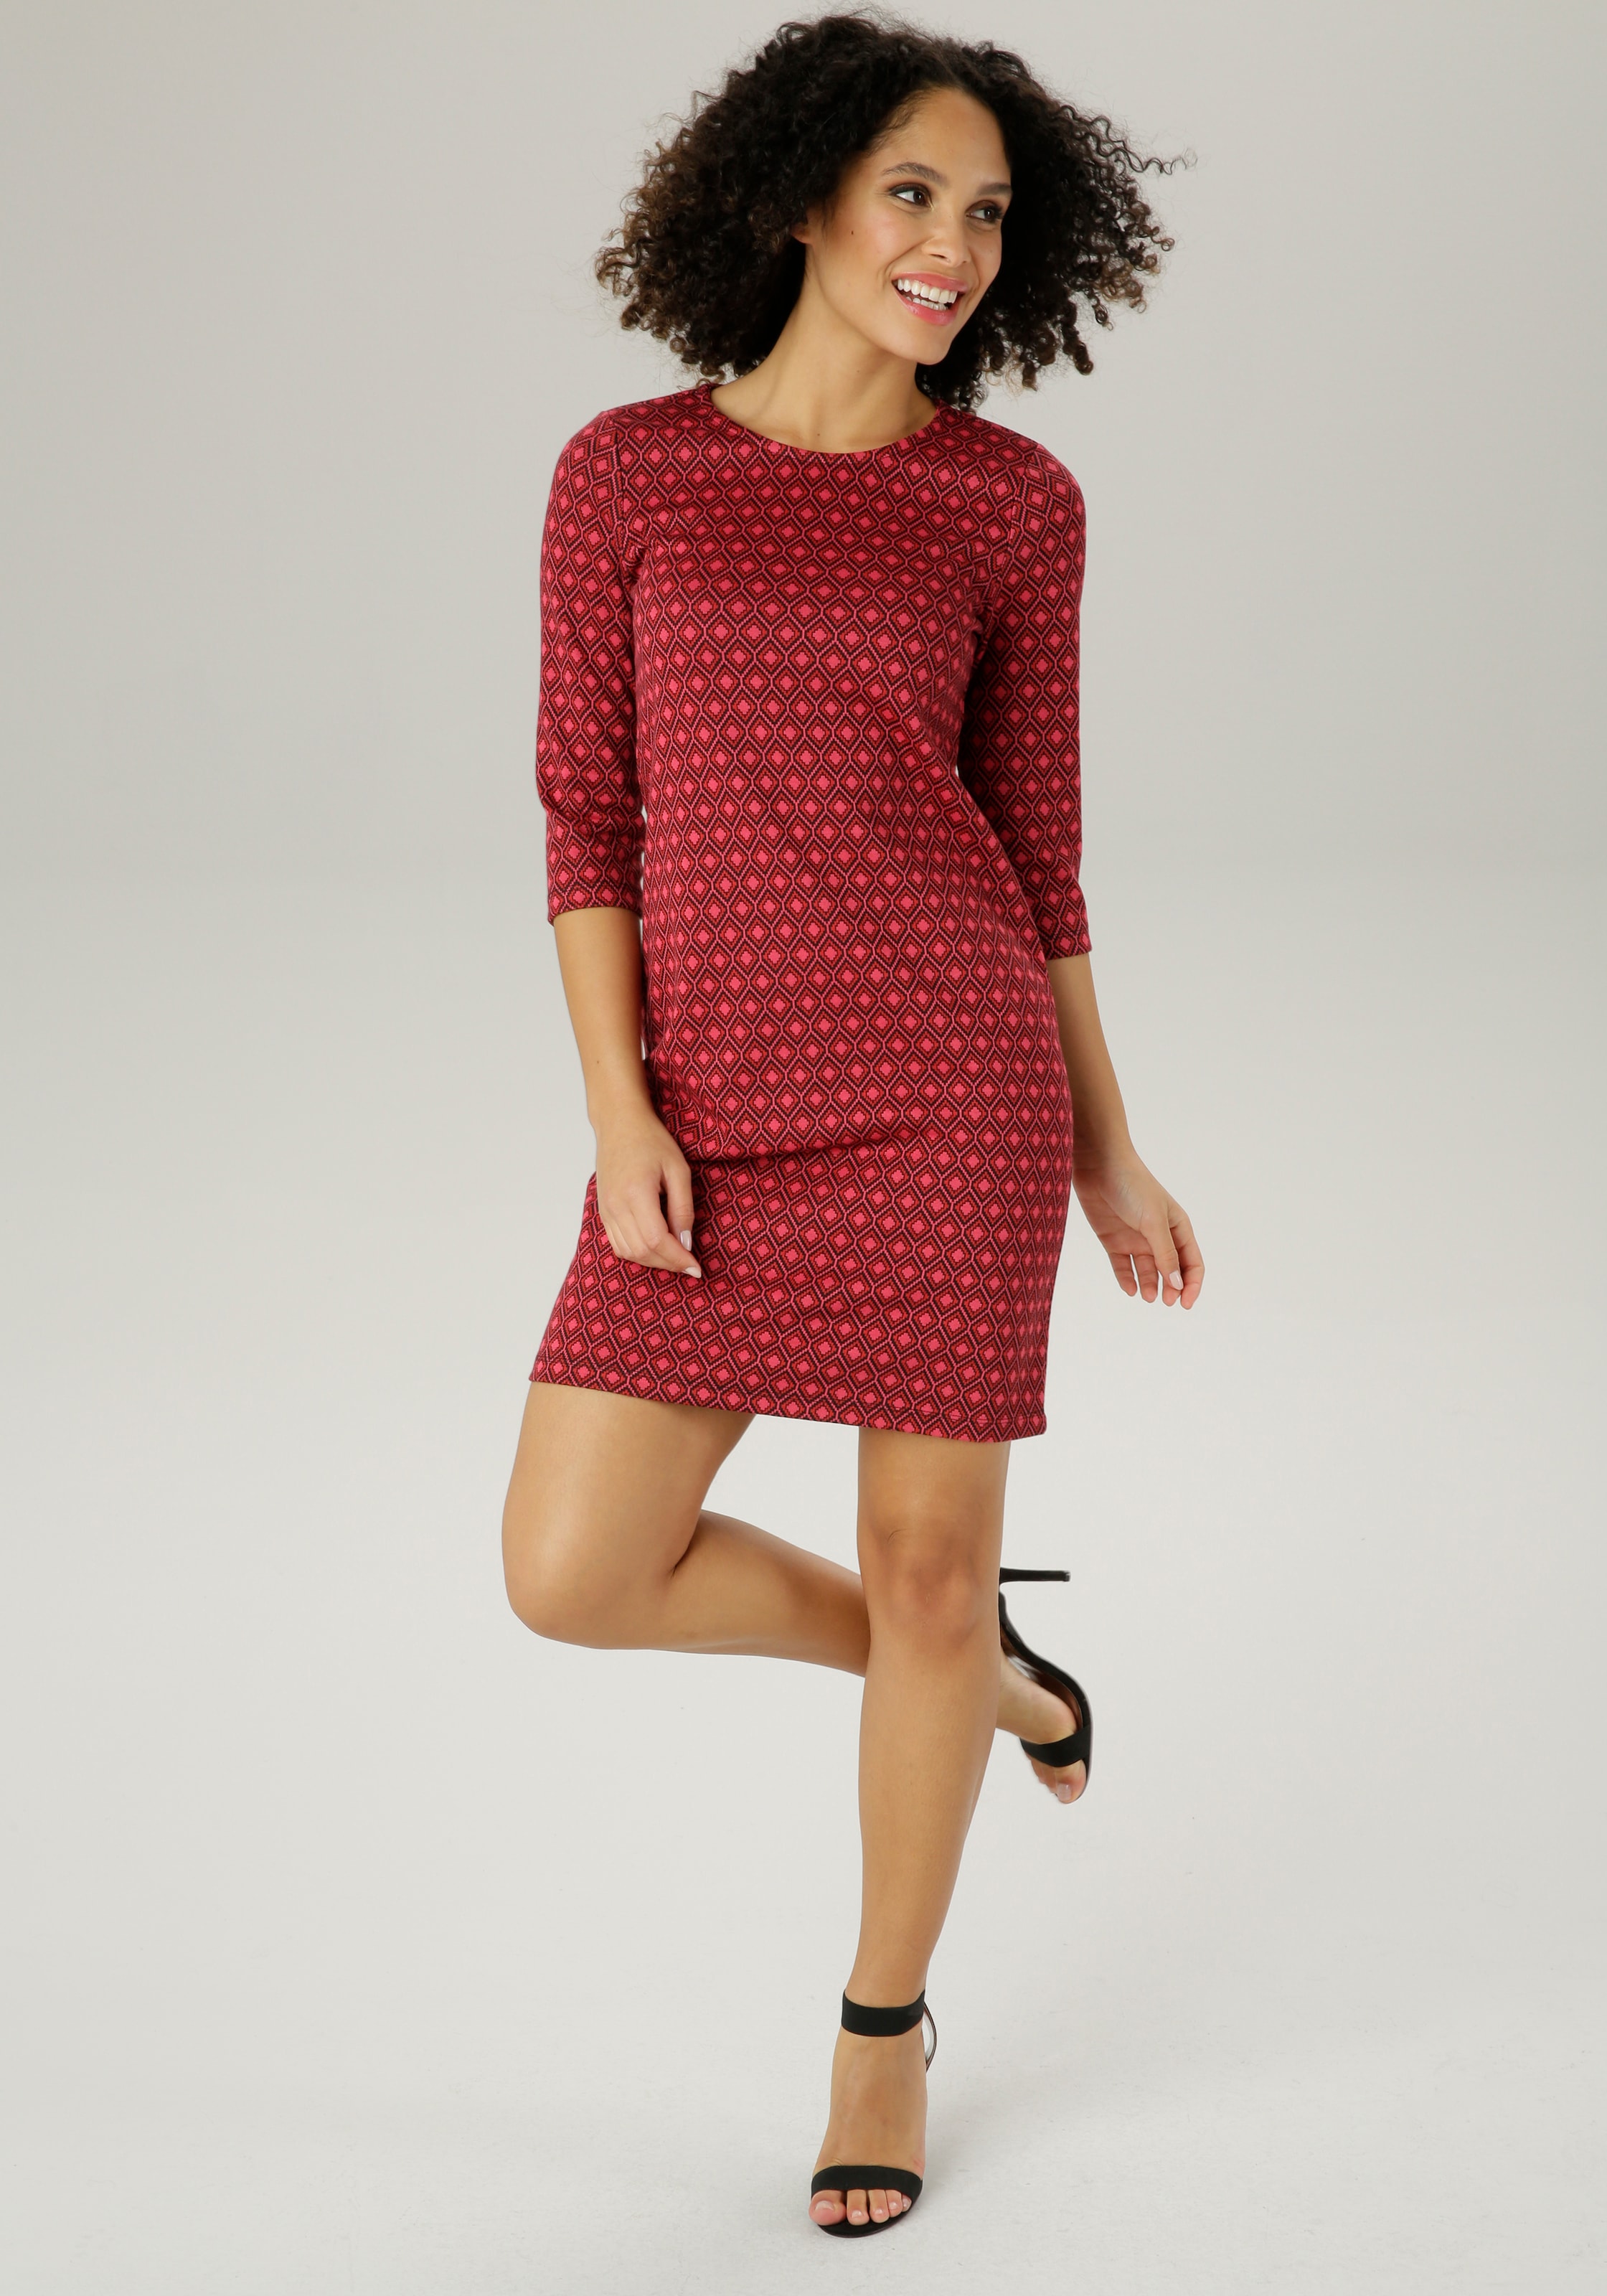 Aniston SELECTED Jerseykleid, in online bei Jacquard-Qualität